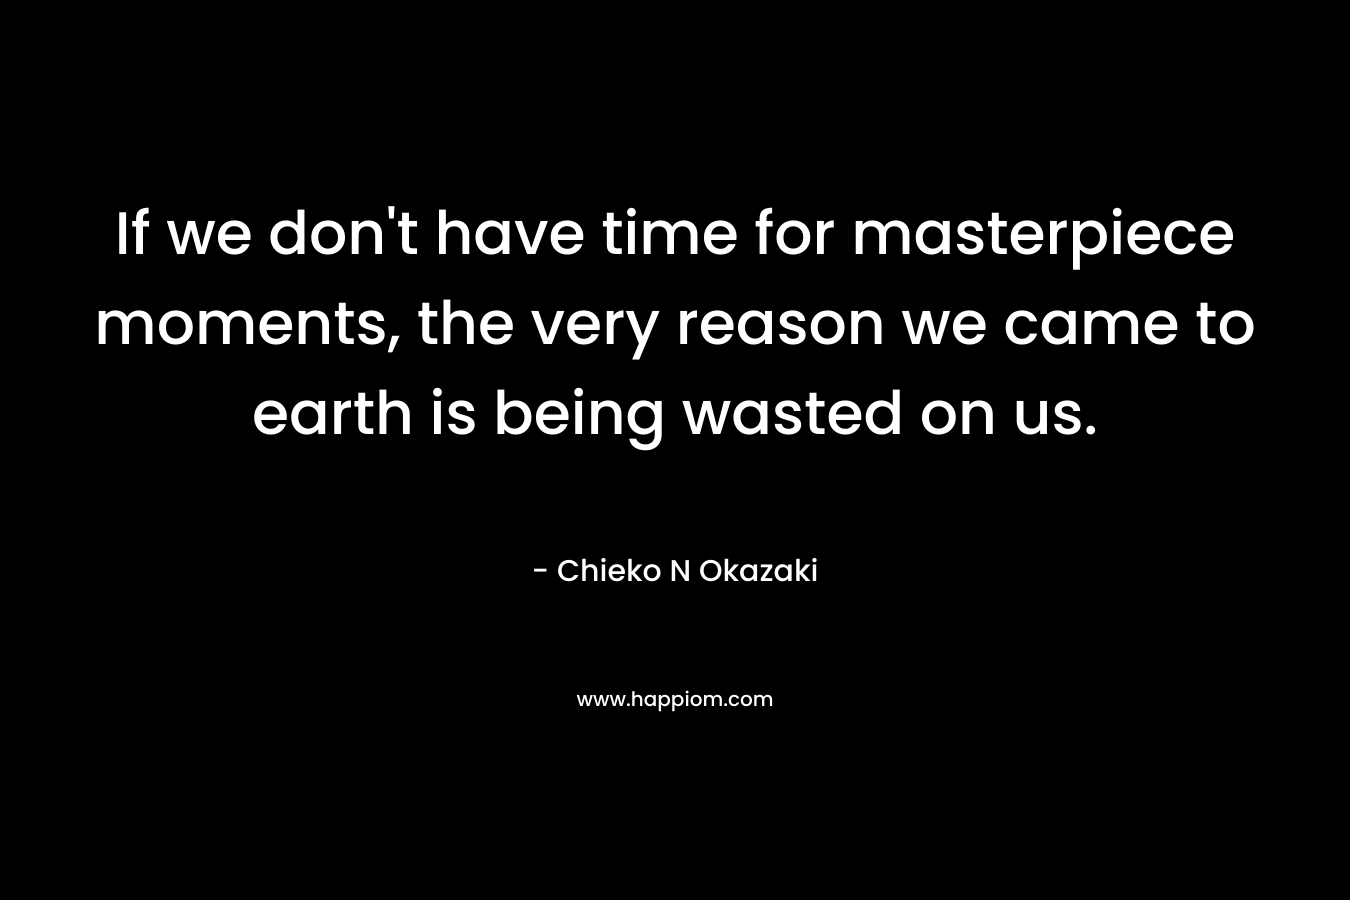 If we don’t have time for masterpiece moments, the very reason we came to earth is being wasted on us. – Chieko N Okazaki